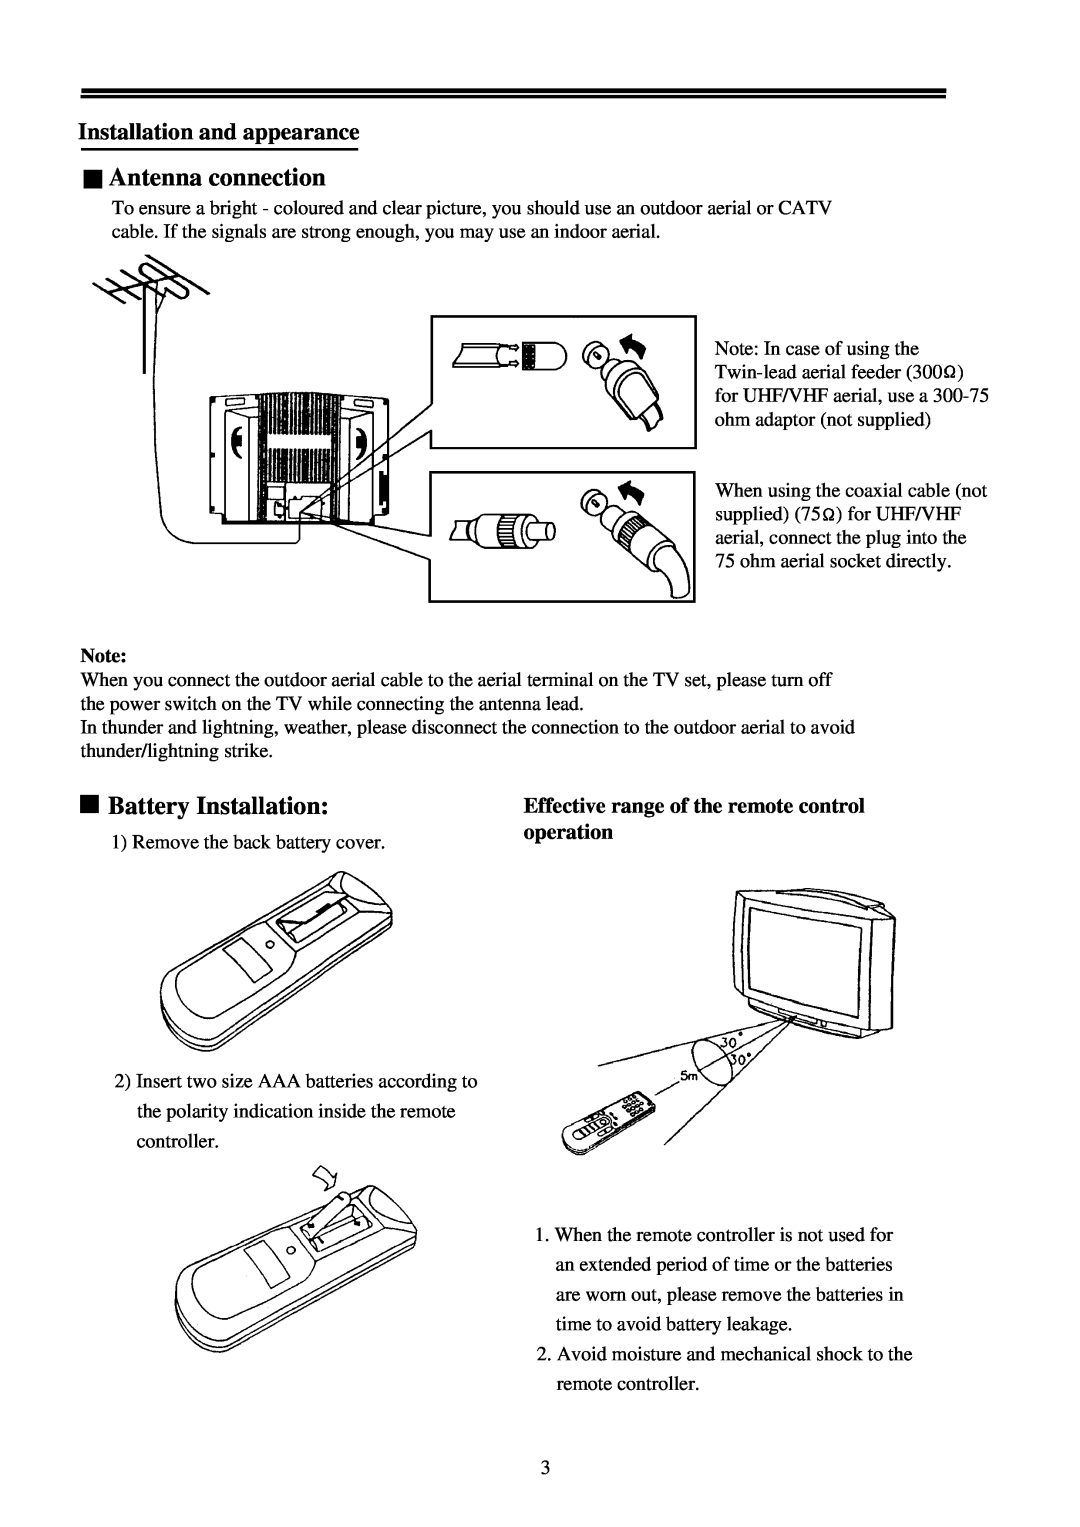 Palsonic 7118 owner manual Antenna connection, Battery Installation, Effective range of the remote control operation 